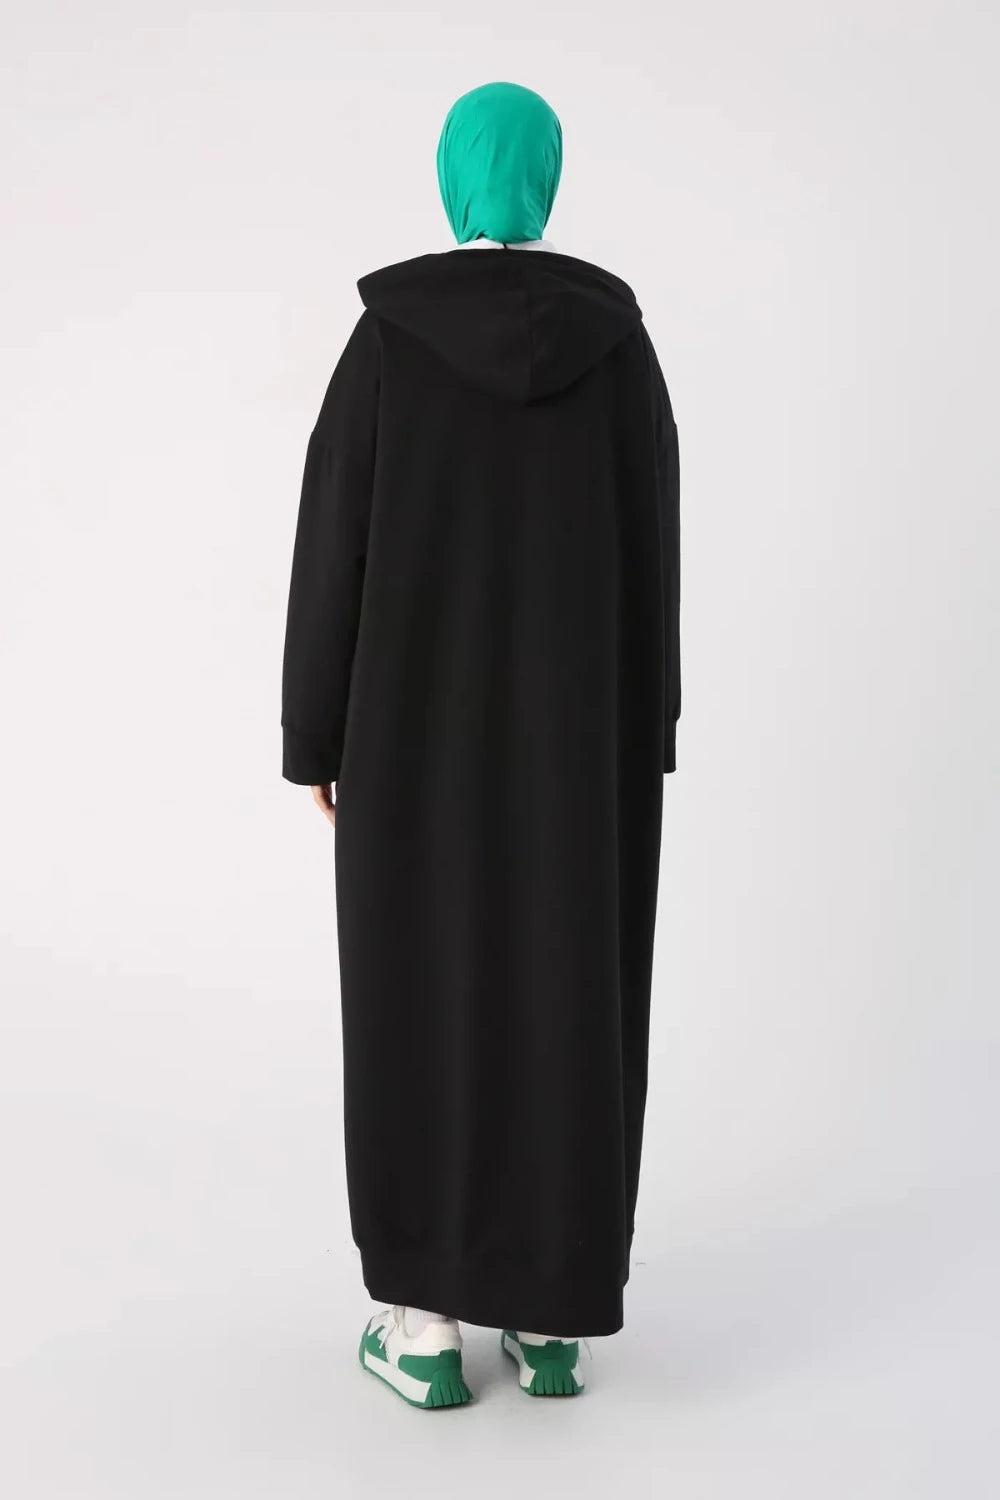 Plus Size Modest Hooded Knitted Dress 